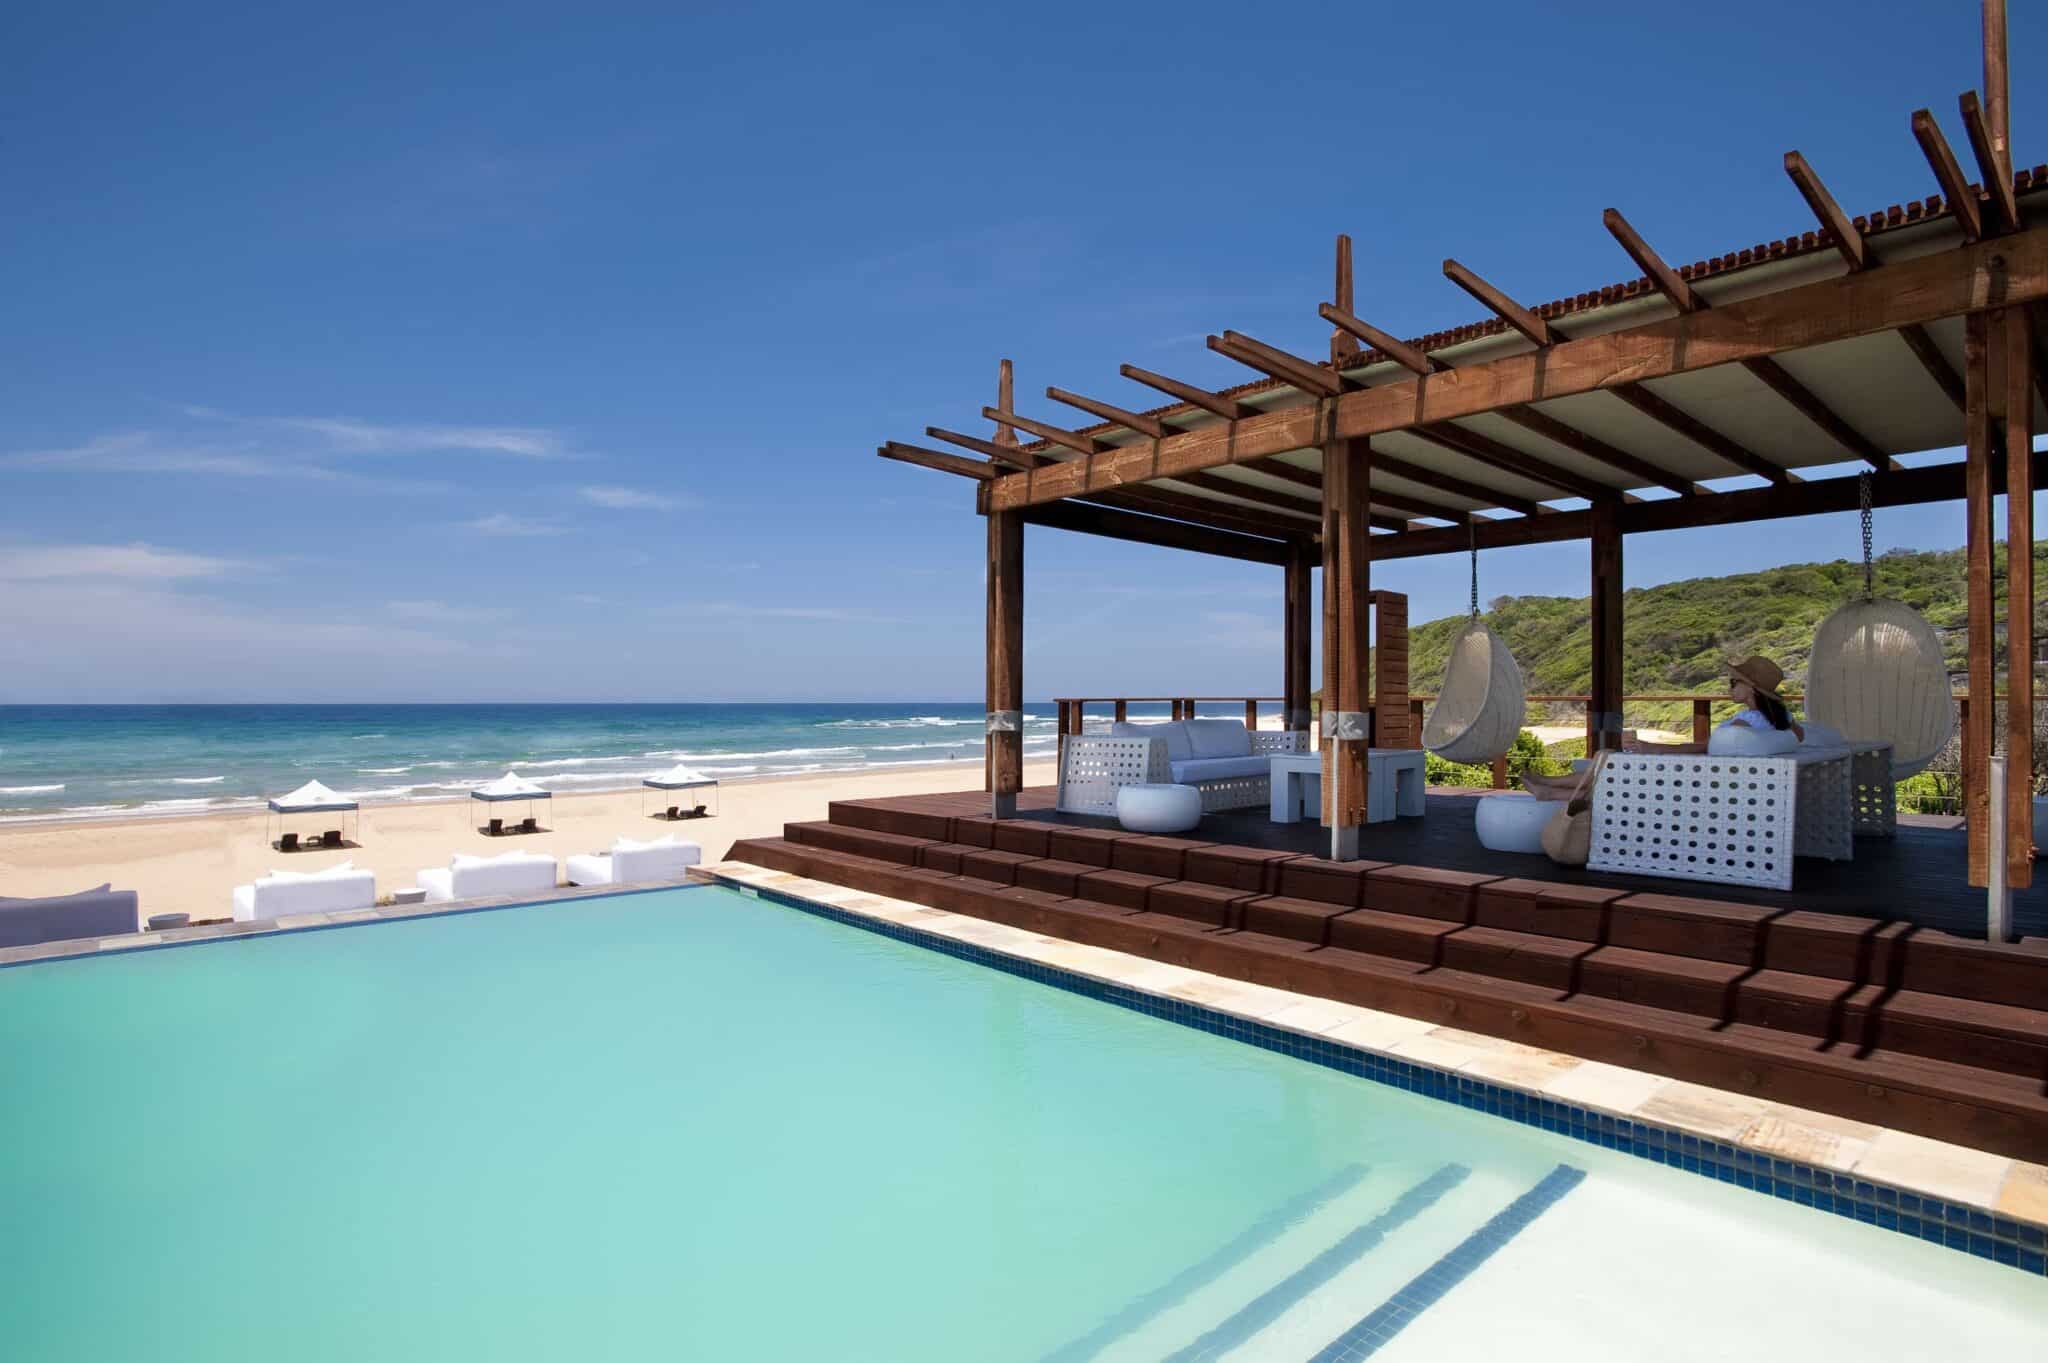 The pool are overlooking the ocean in Mozambique